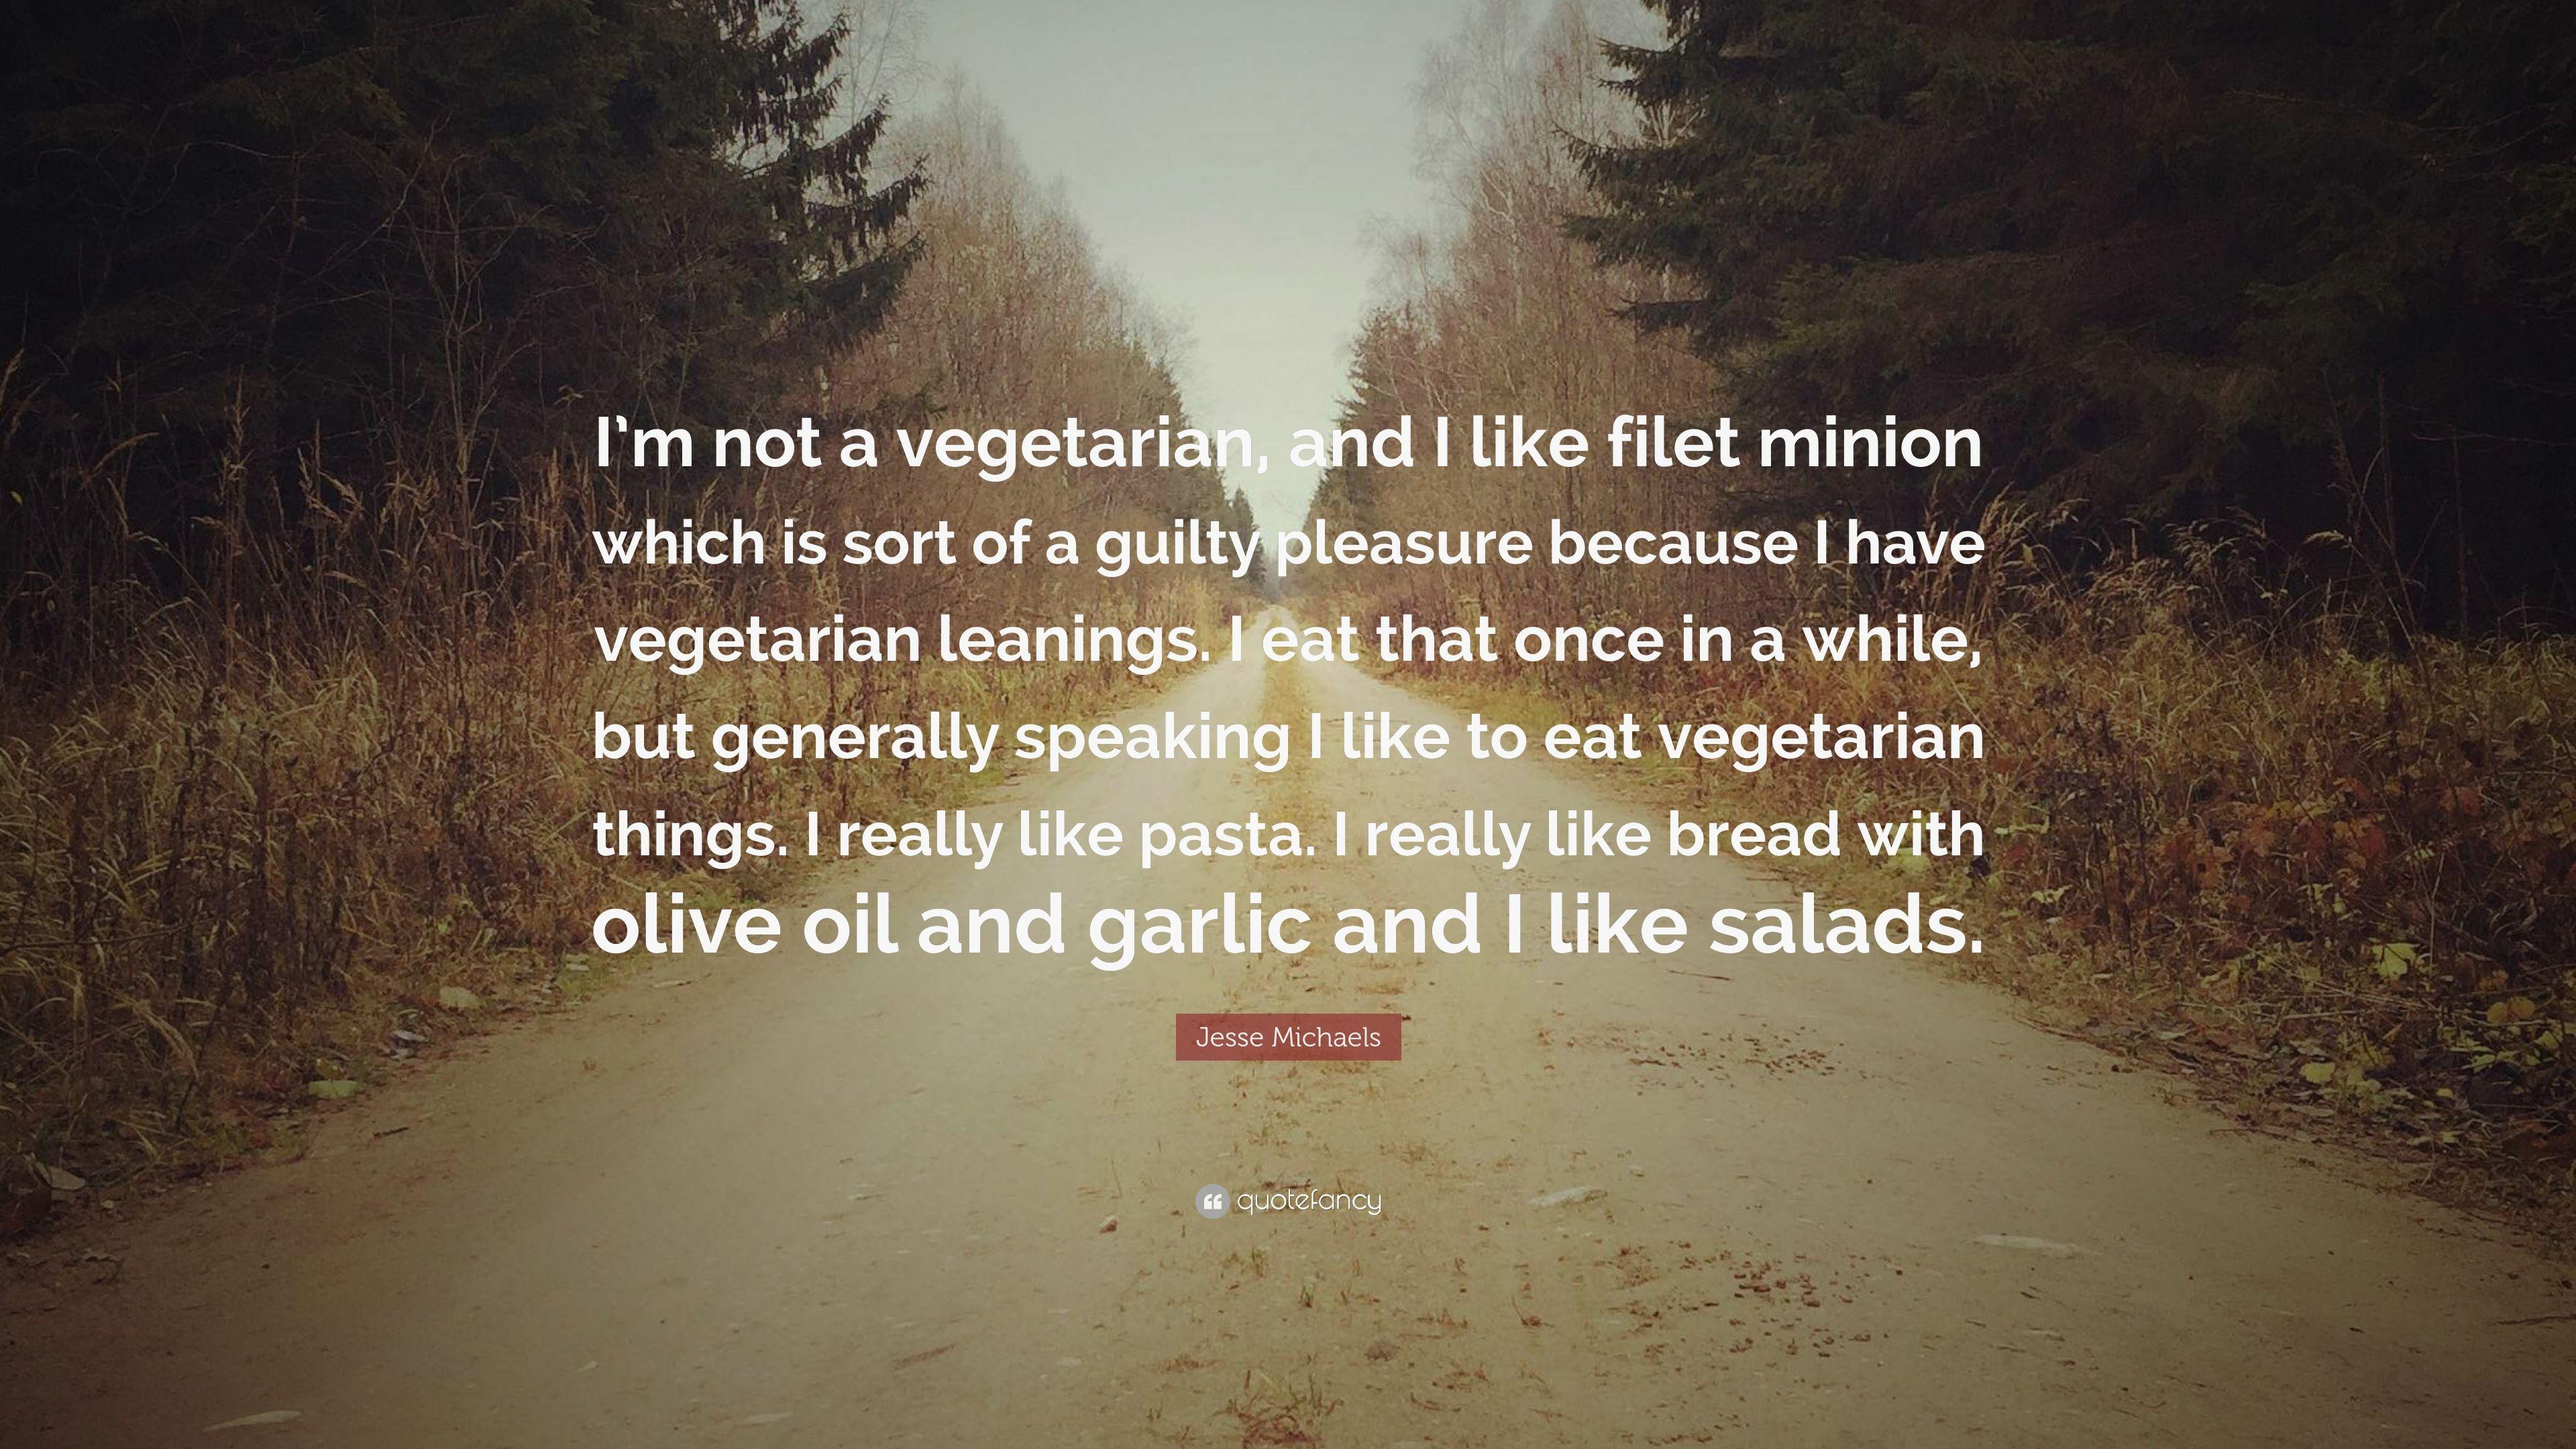 Jesse Michaels Quote: “I'm not a vegetarian, and I like filet minion